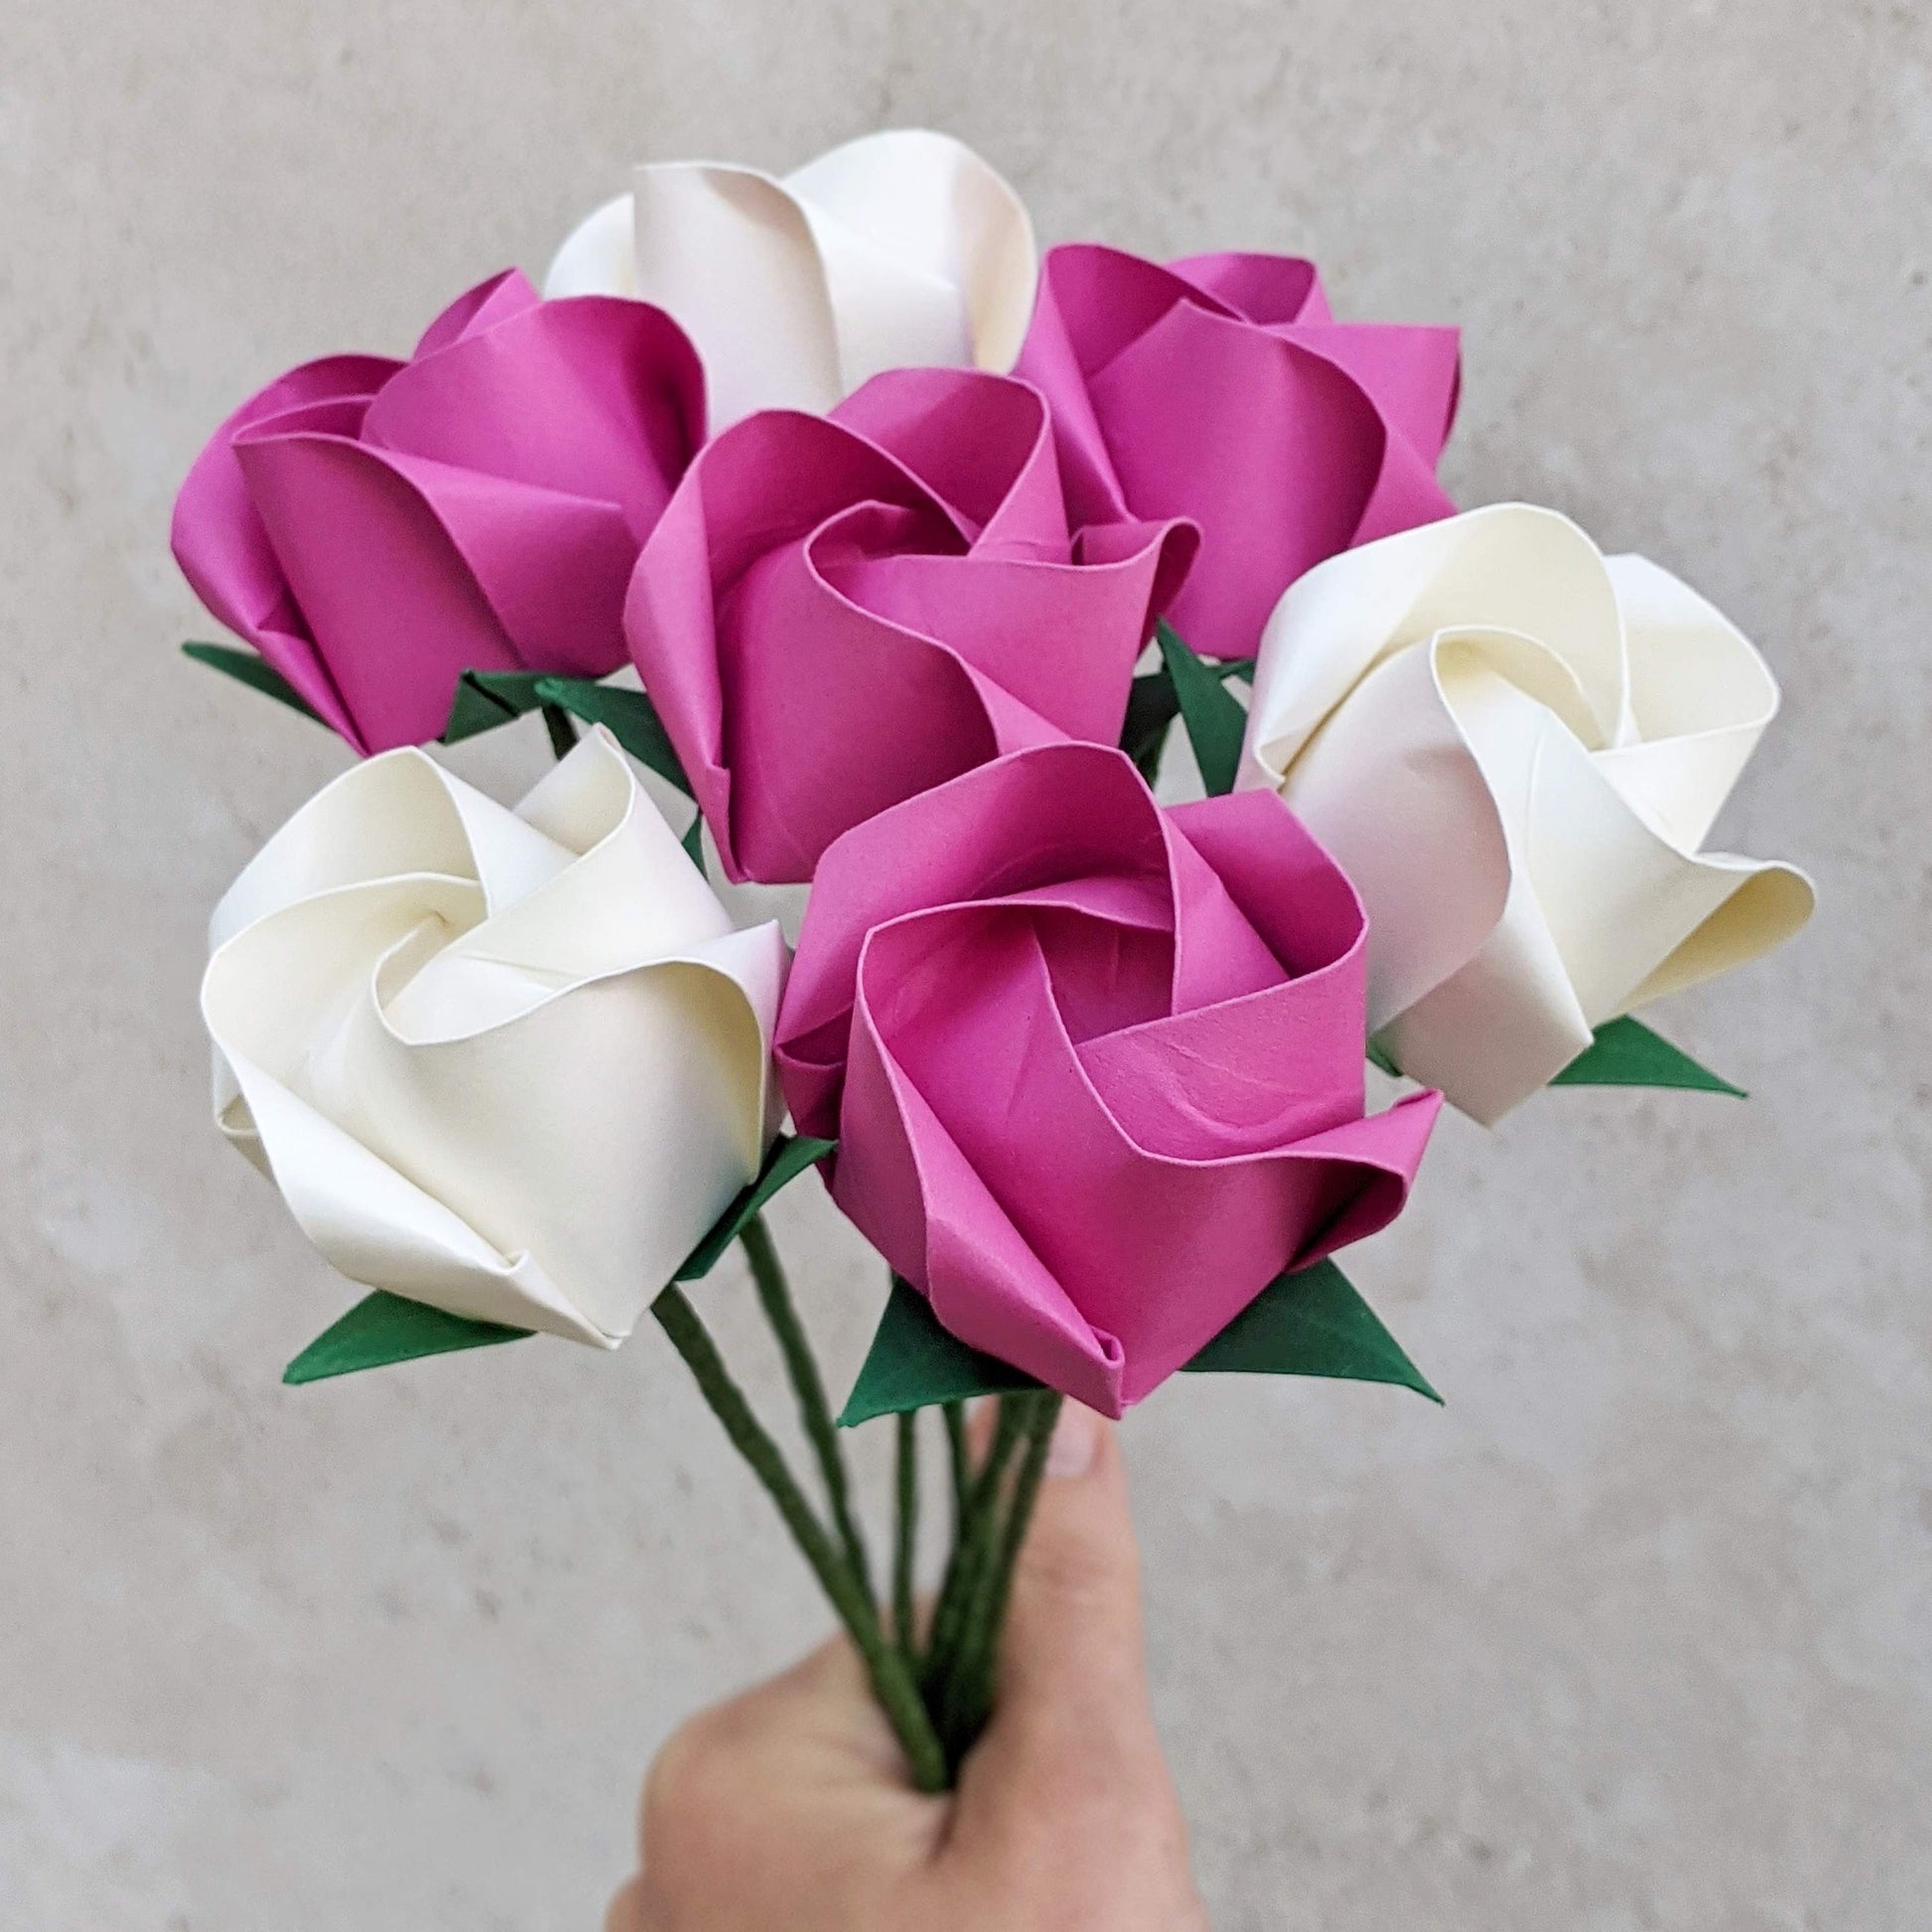 Hand holding a bouquet of seven origami paper roses, 3 white and 4 hot pink